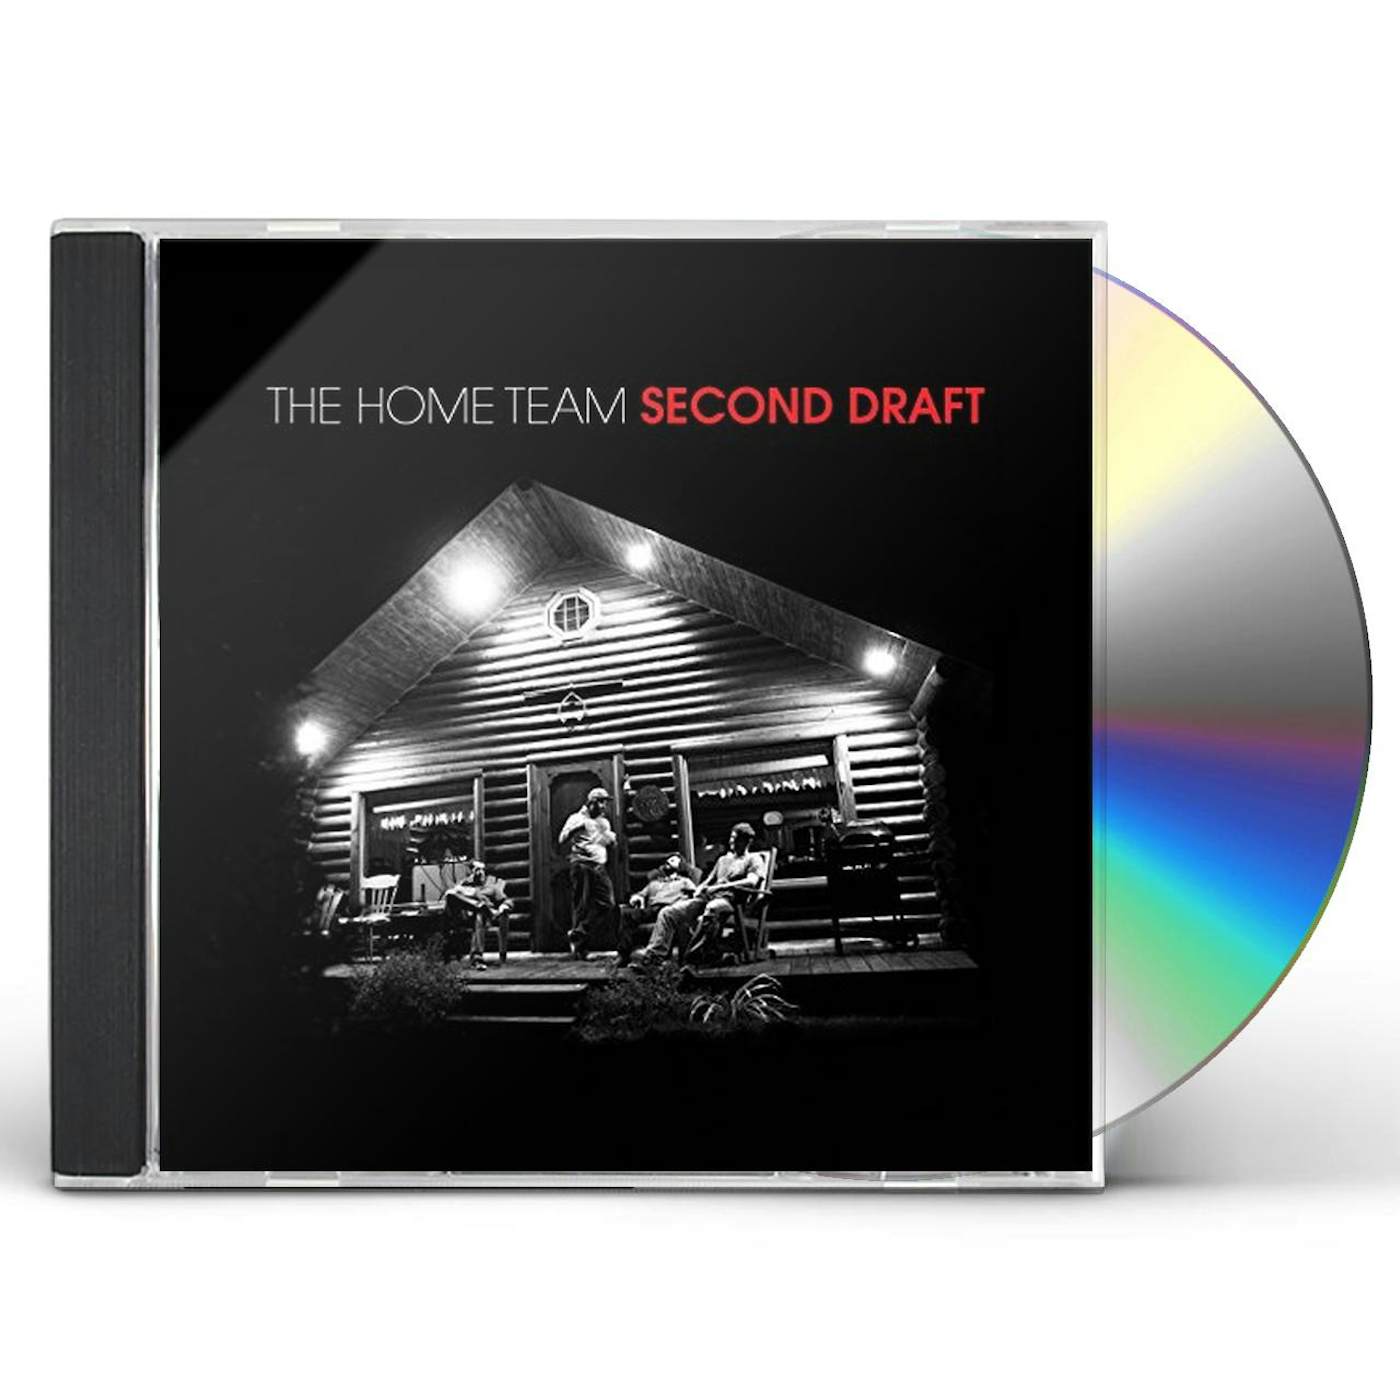 The Home Team SECOND DRAFT CD